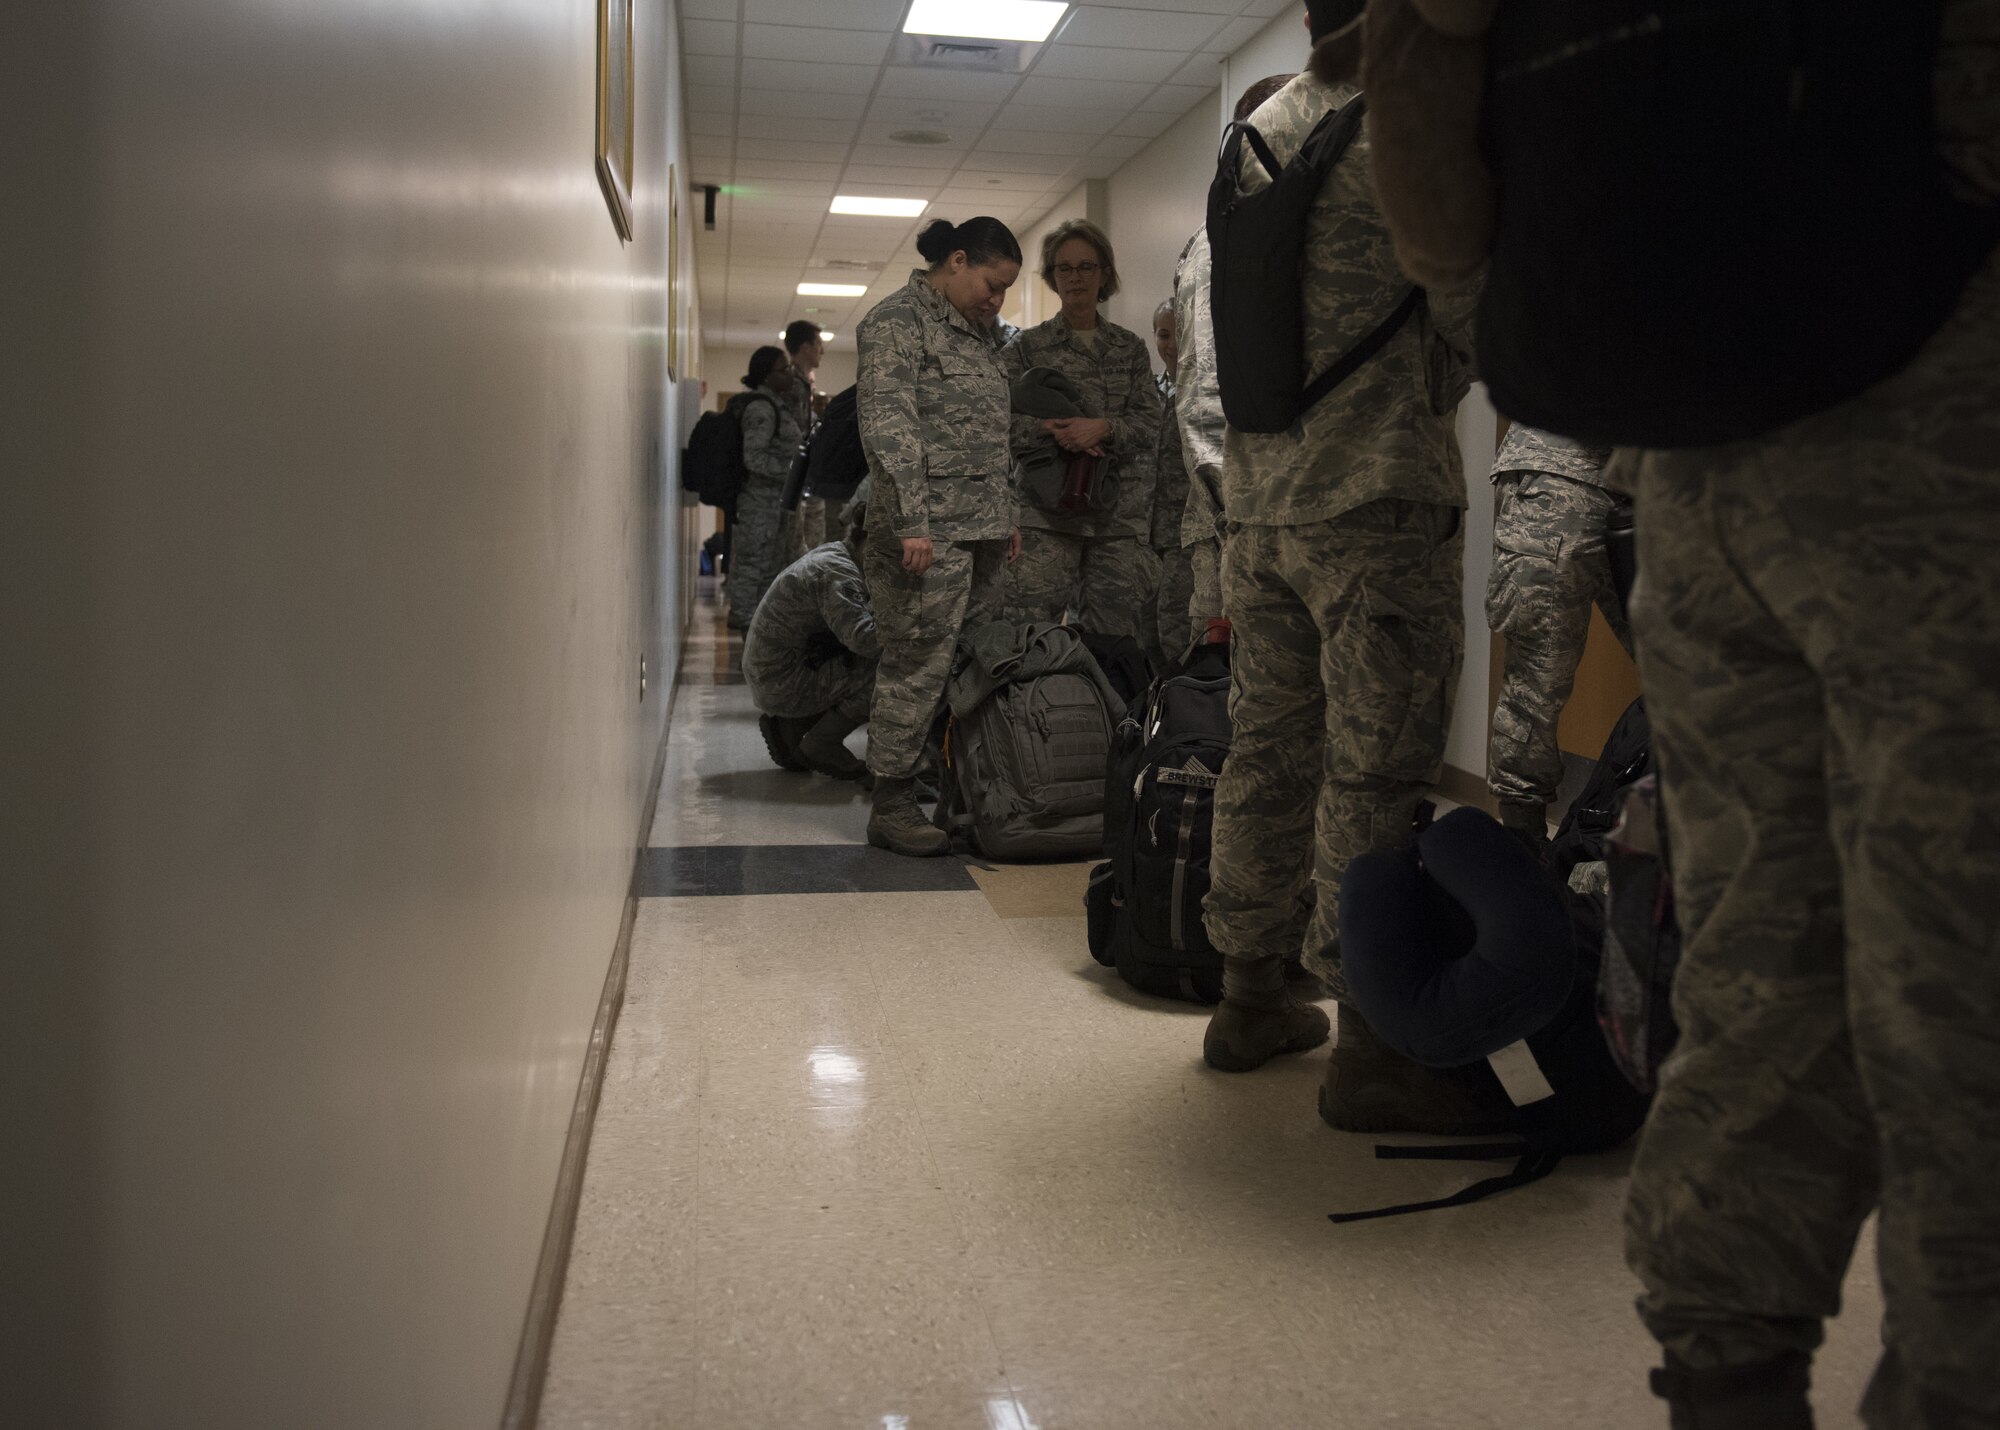 Airmen from the 81st Medical Group in process at the Roberts Consolidated Aircraft Maintenance Facility at Keesler Air Force Base, Mississippi, April 16, 2018. Ninety-nine Airmen from the 81st MDG traveled to Indiana to help set up a medical facility in support of Joint Task Force Civil Service. More than 3,200 Defense Department and civilian medical personnel are participating in the operation. (U.S. Air Force photo by Senior Airman Holly Mansfield)